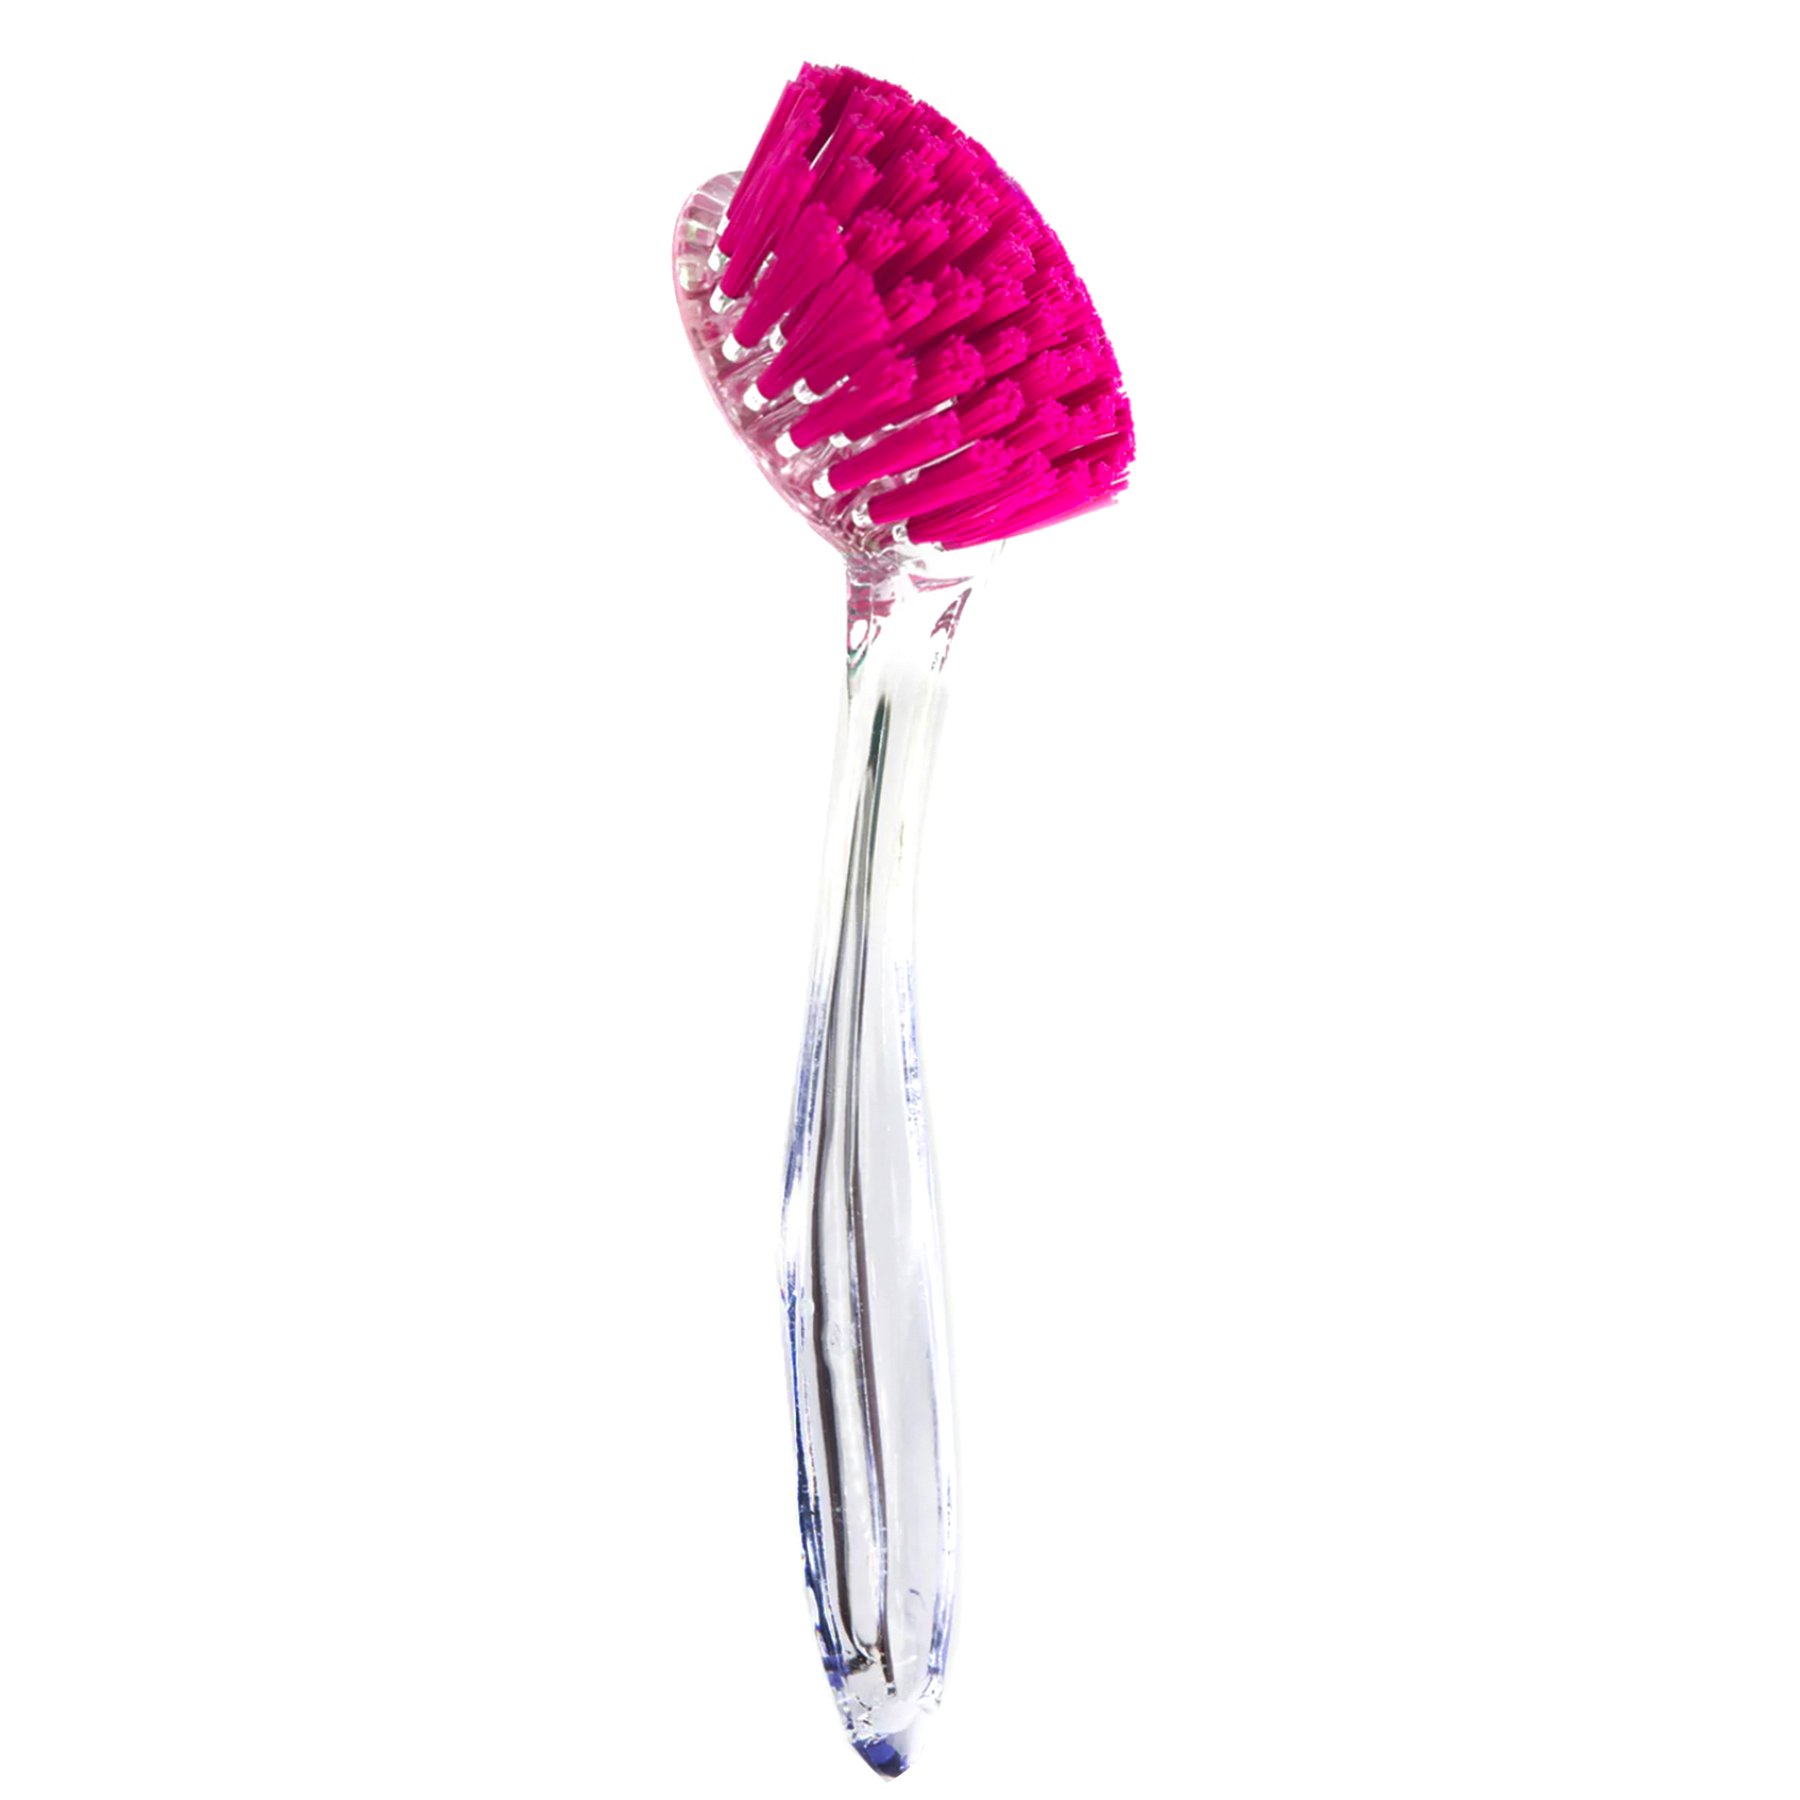 W Home Dish Brush, Soft Long Handle and Durable Nylon Bristles, Kitchen  Scrubber, Pink